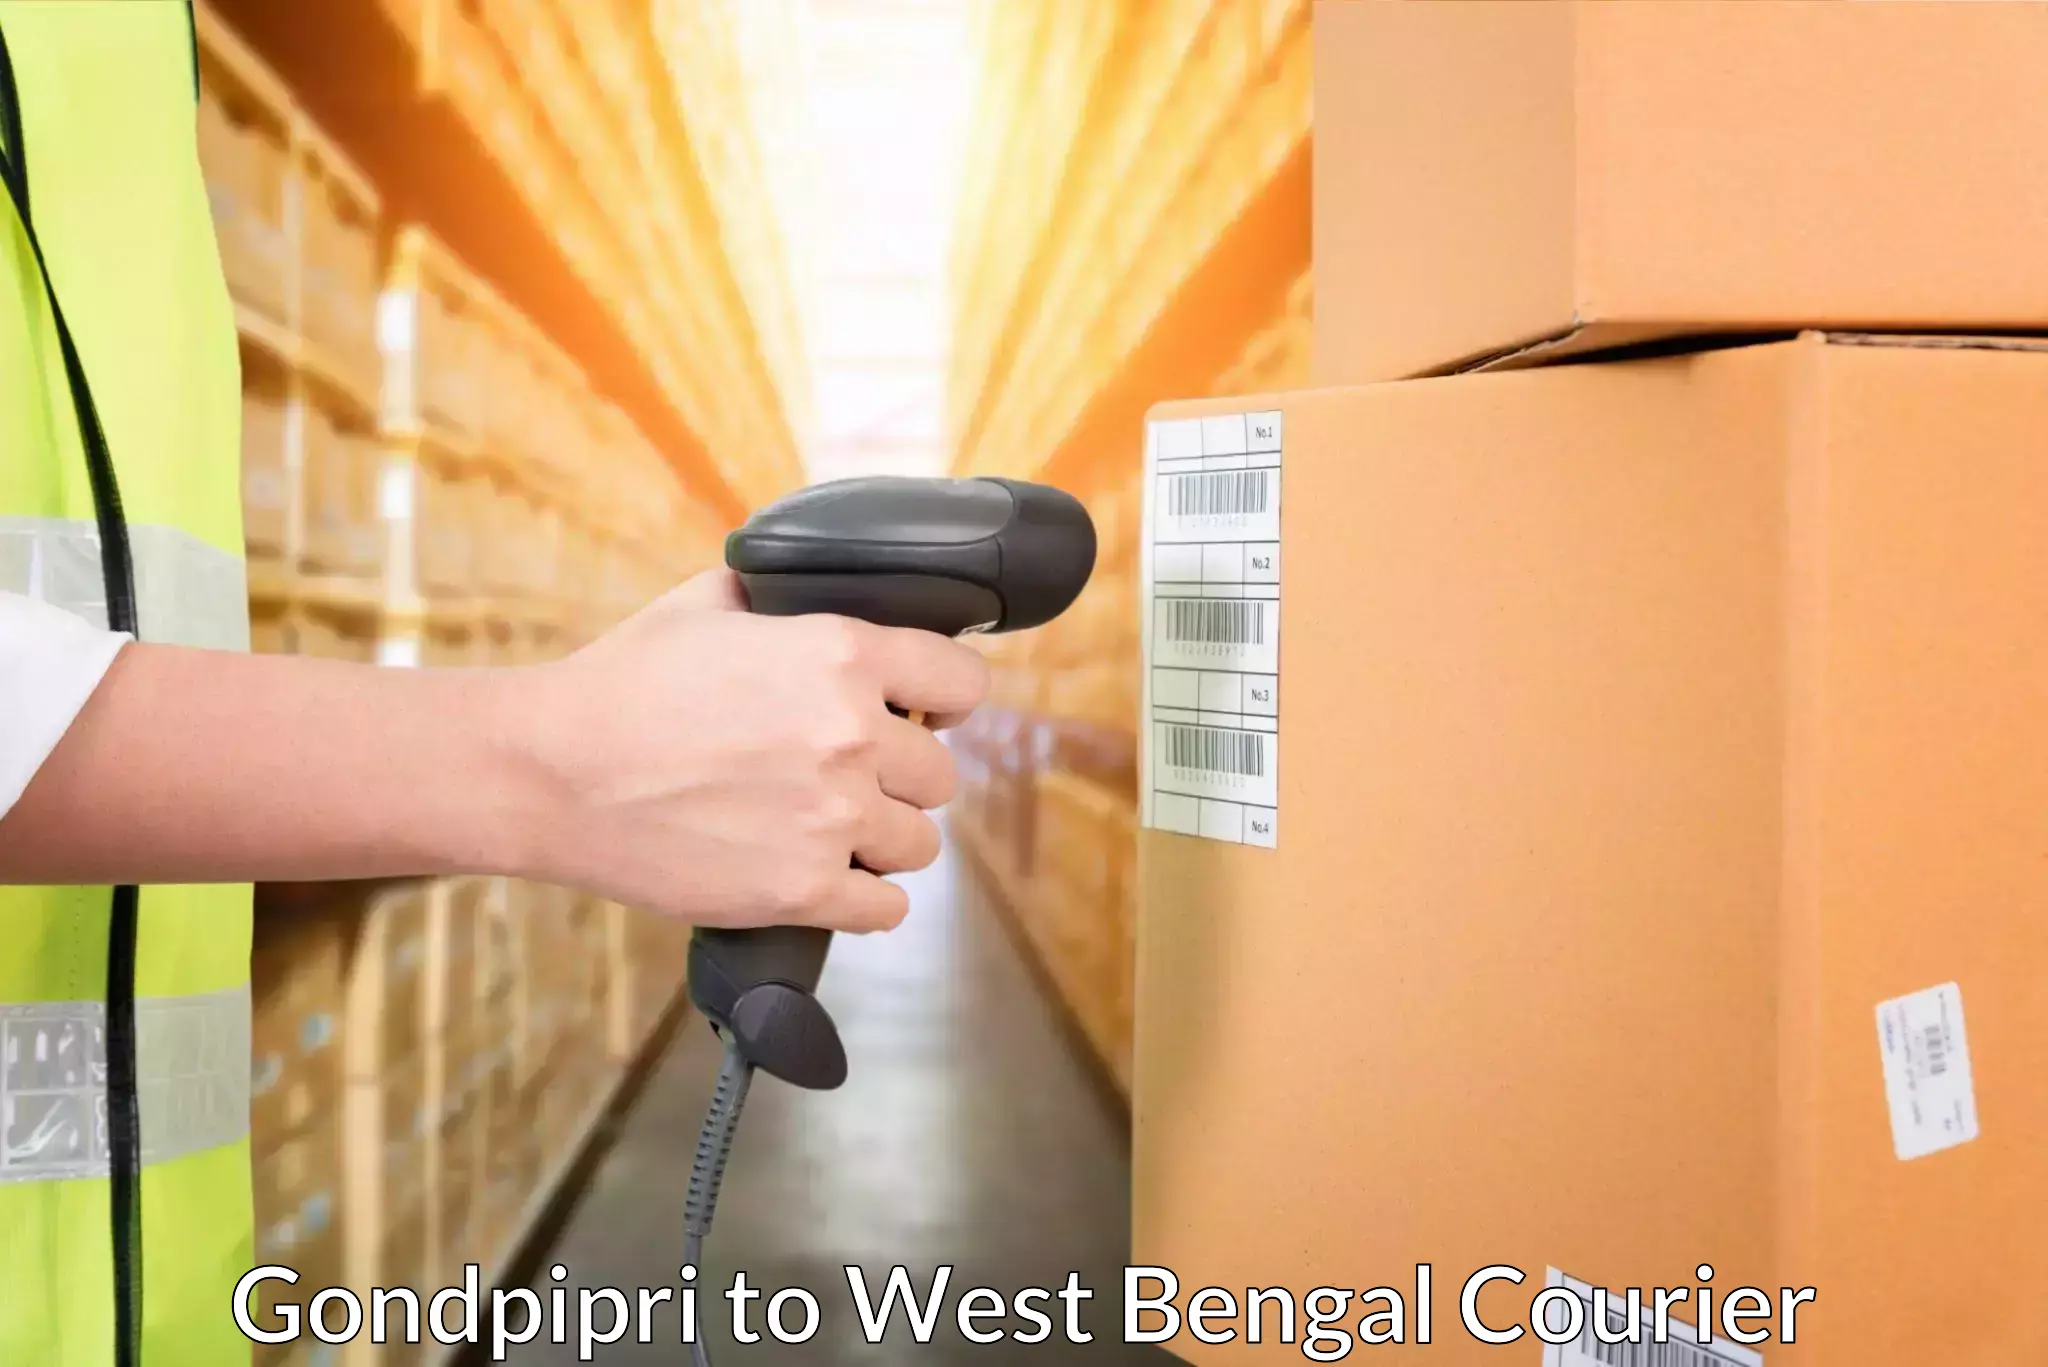 Seamless shipping experience Gondpipri to Mohammad Bazar